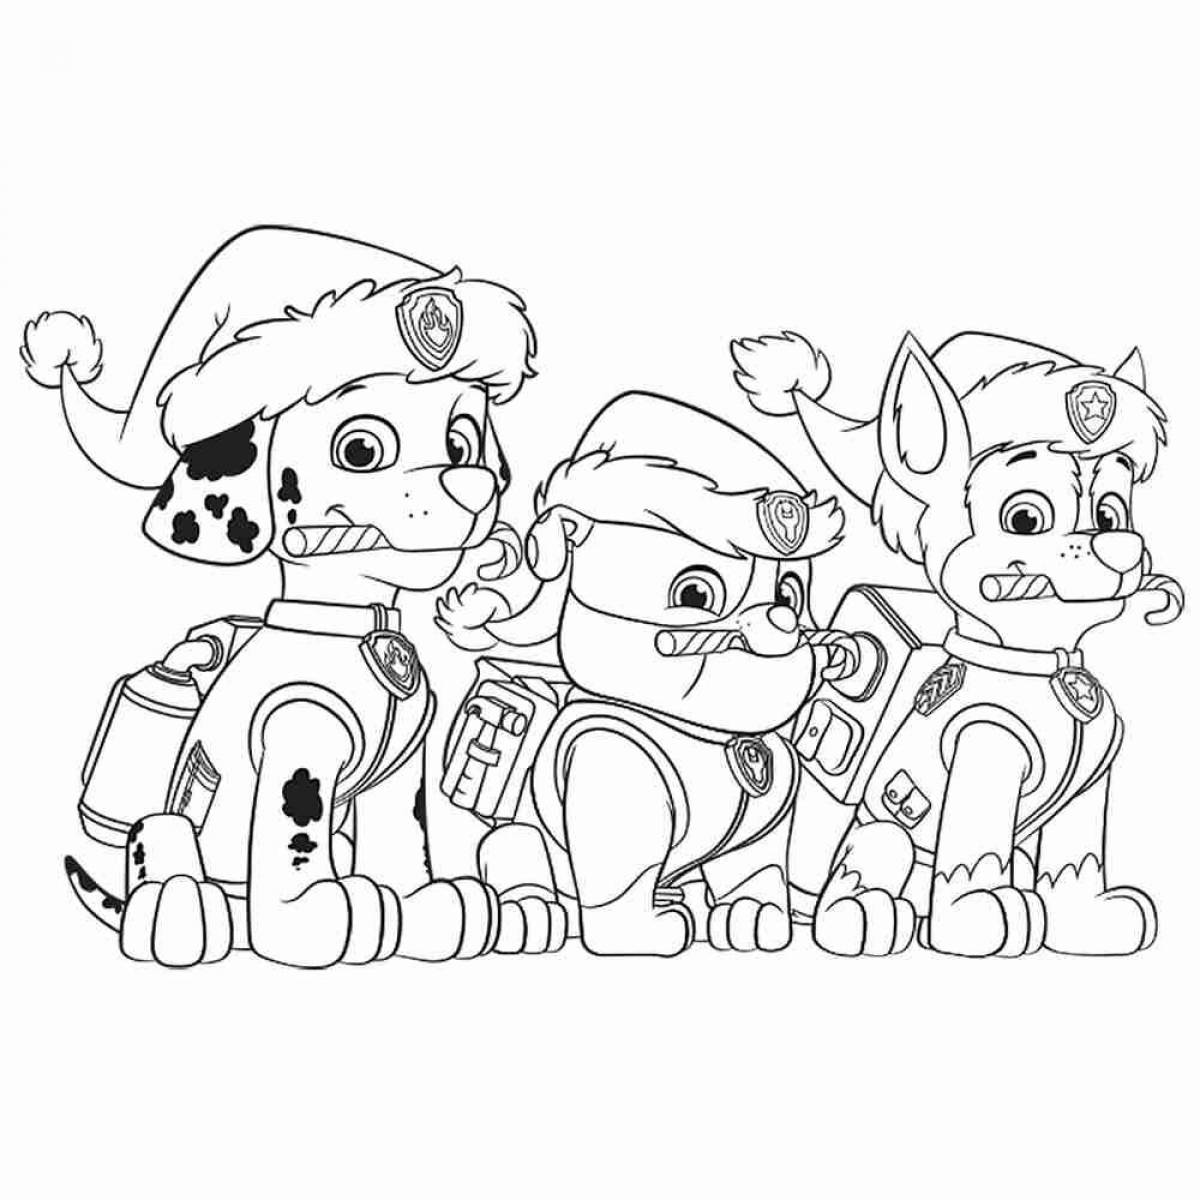 Innovative Paw Patrol coloring page new